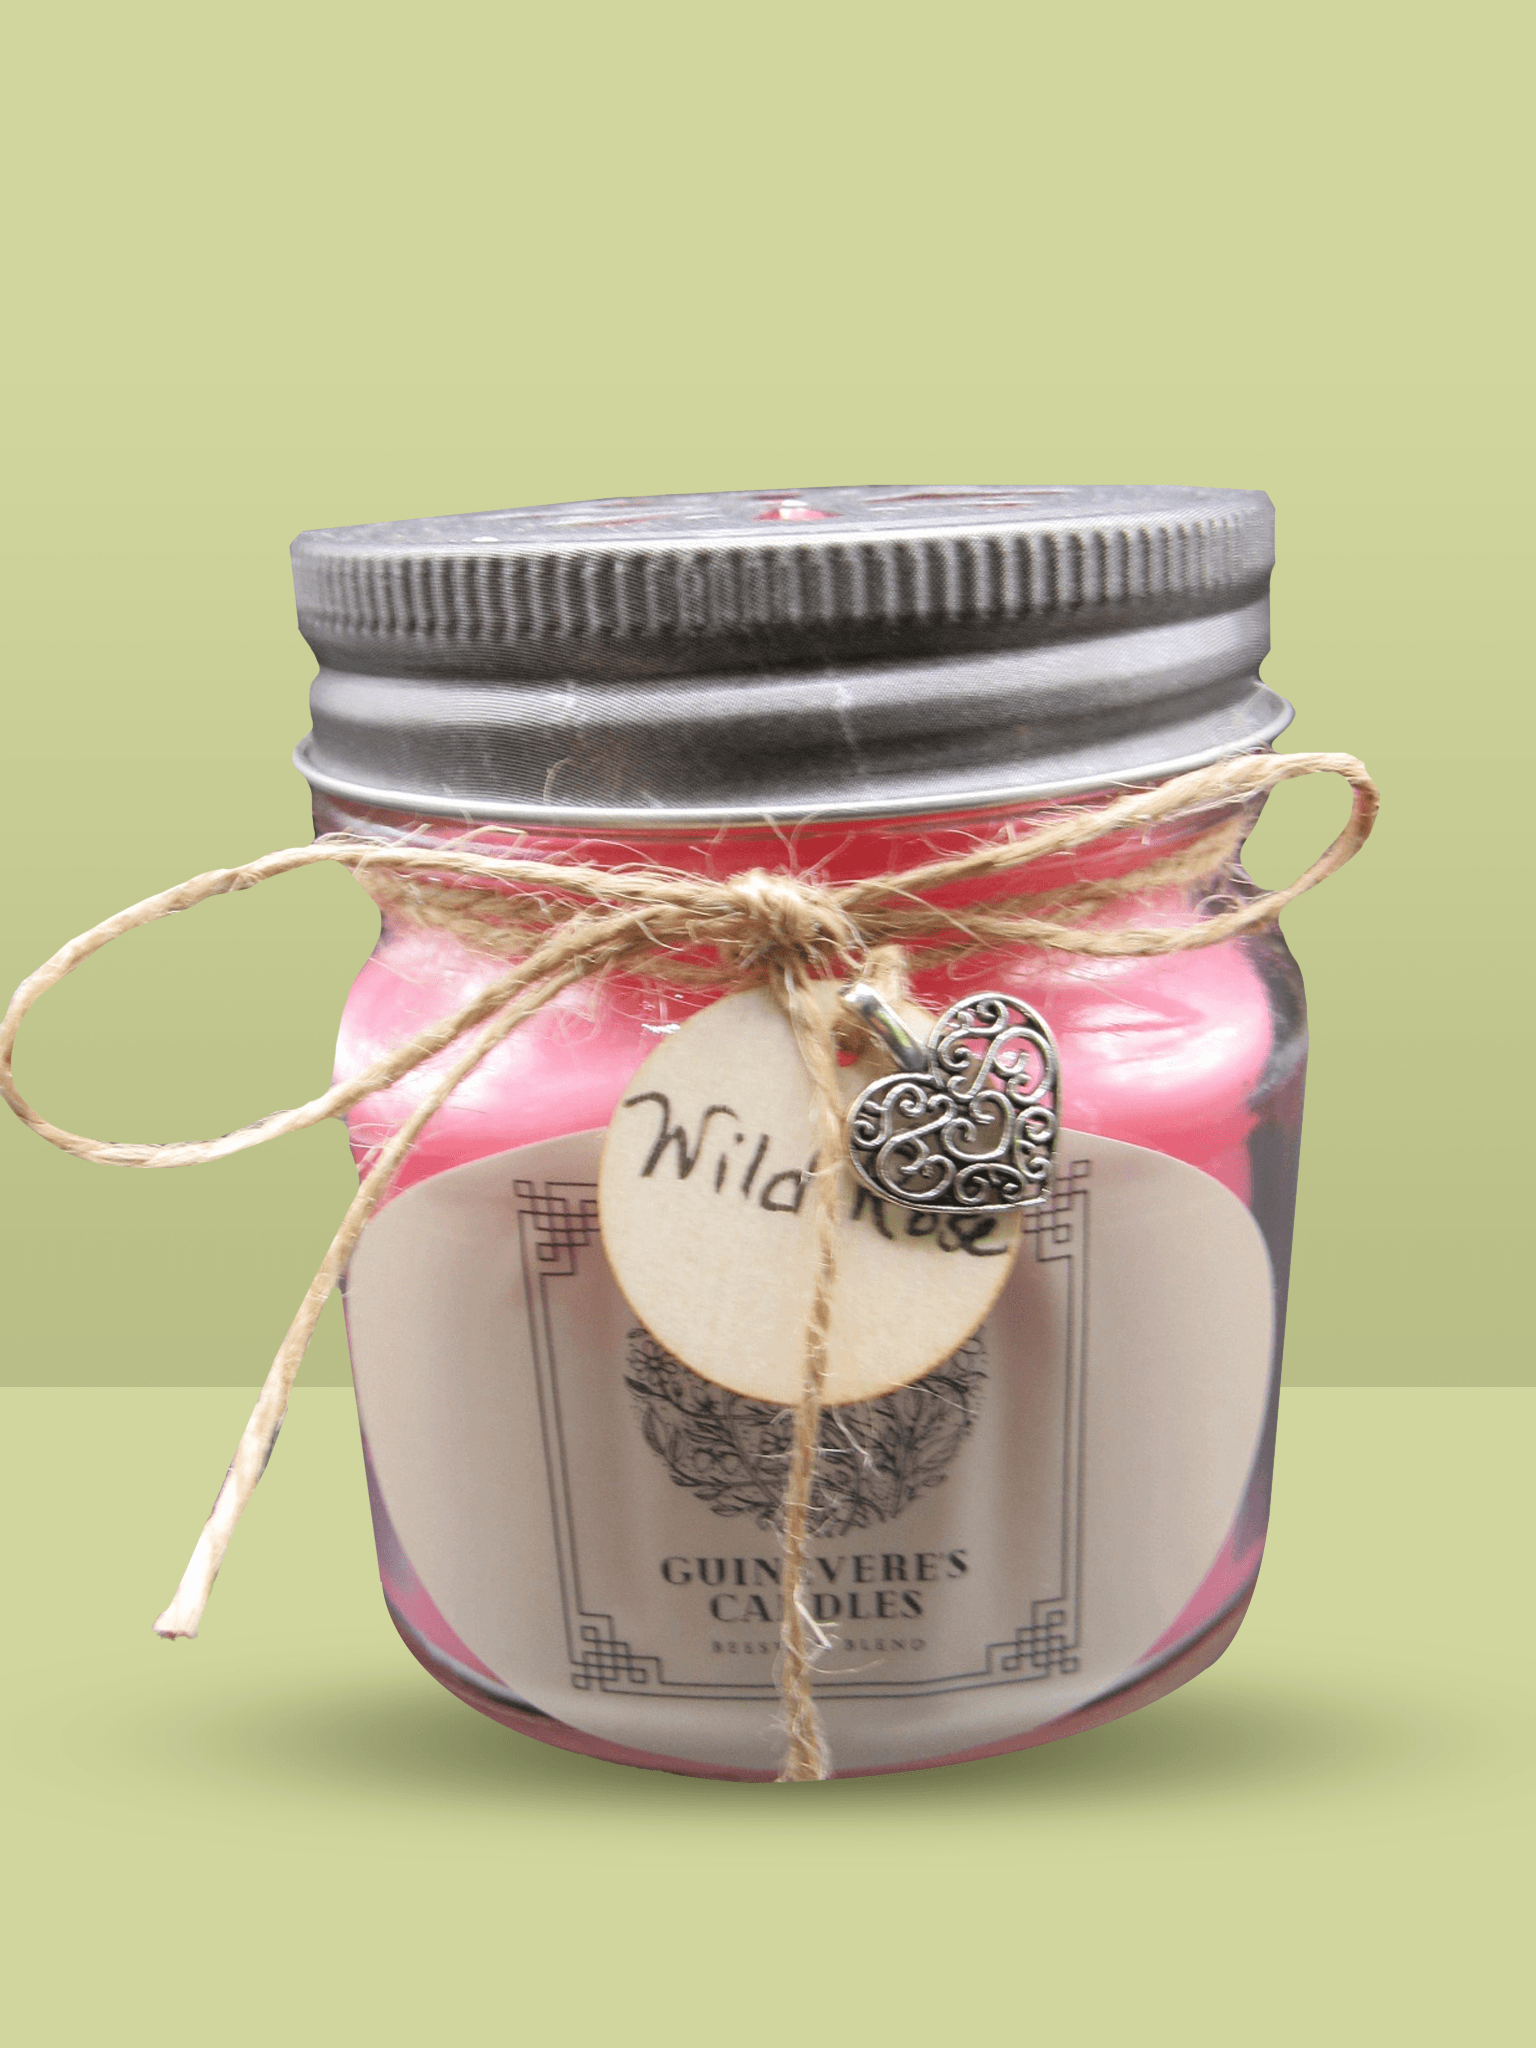 Guinevere's Jar Candles